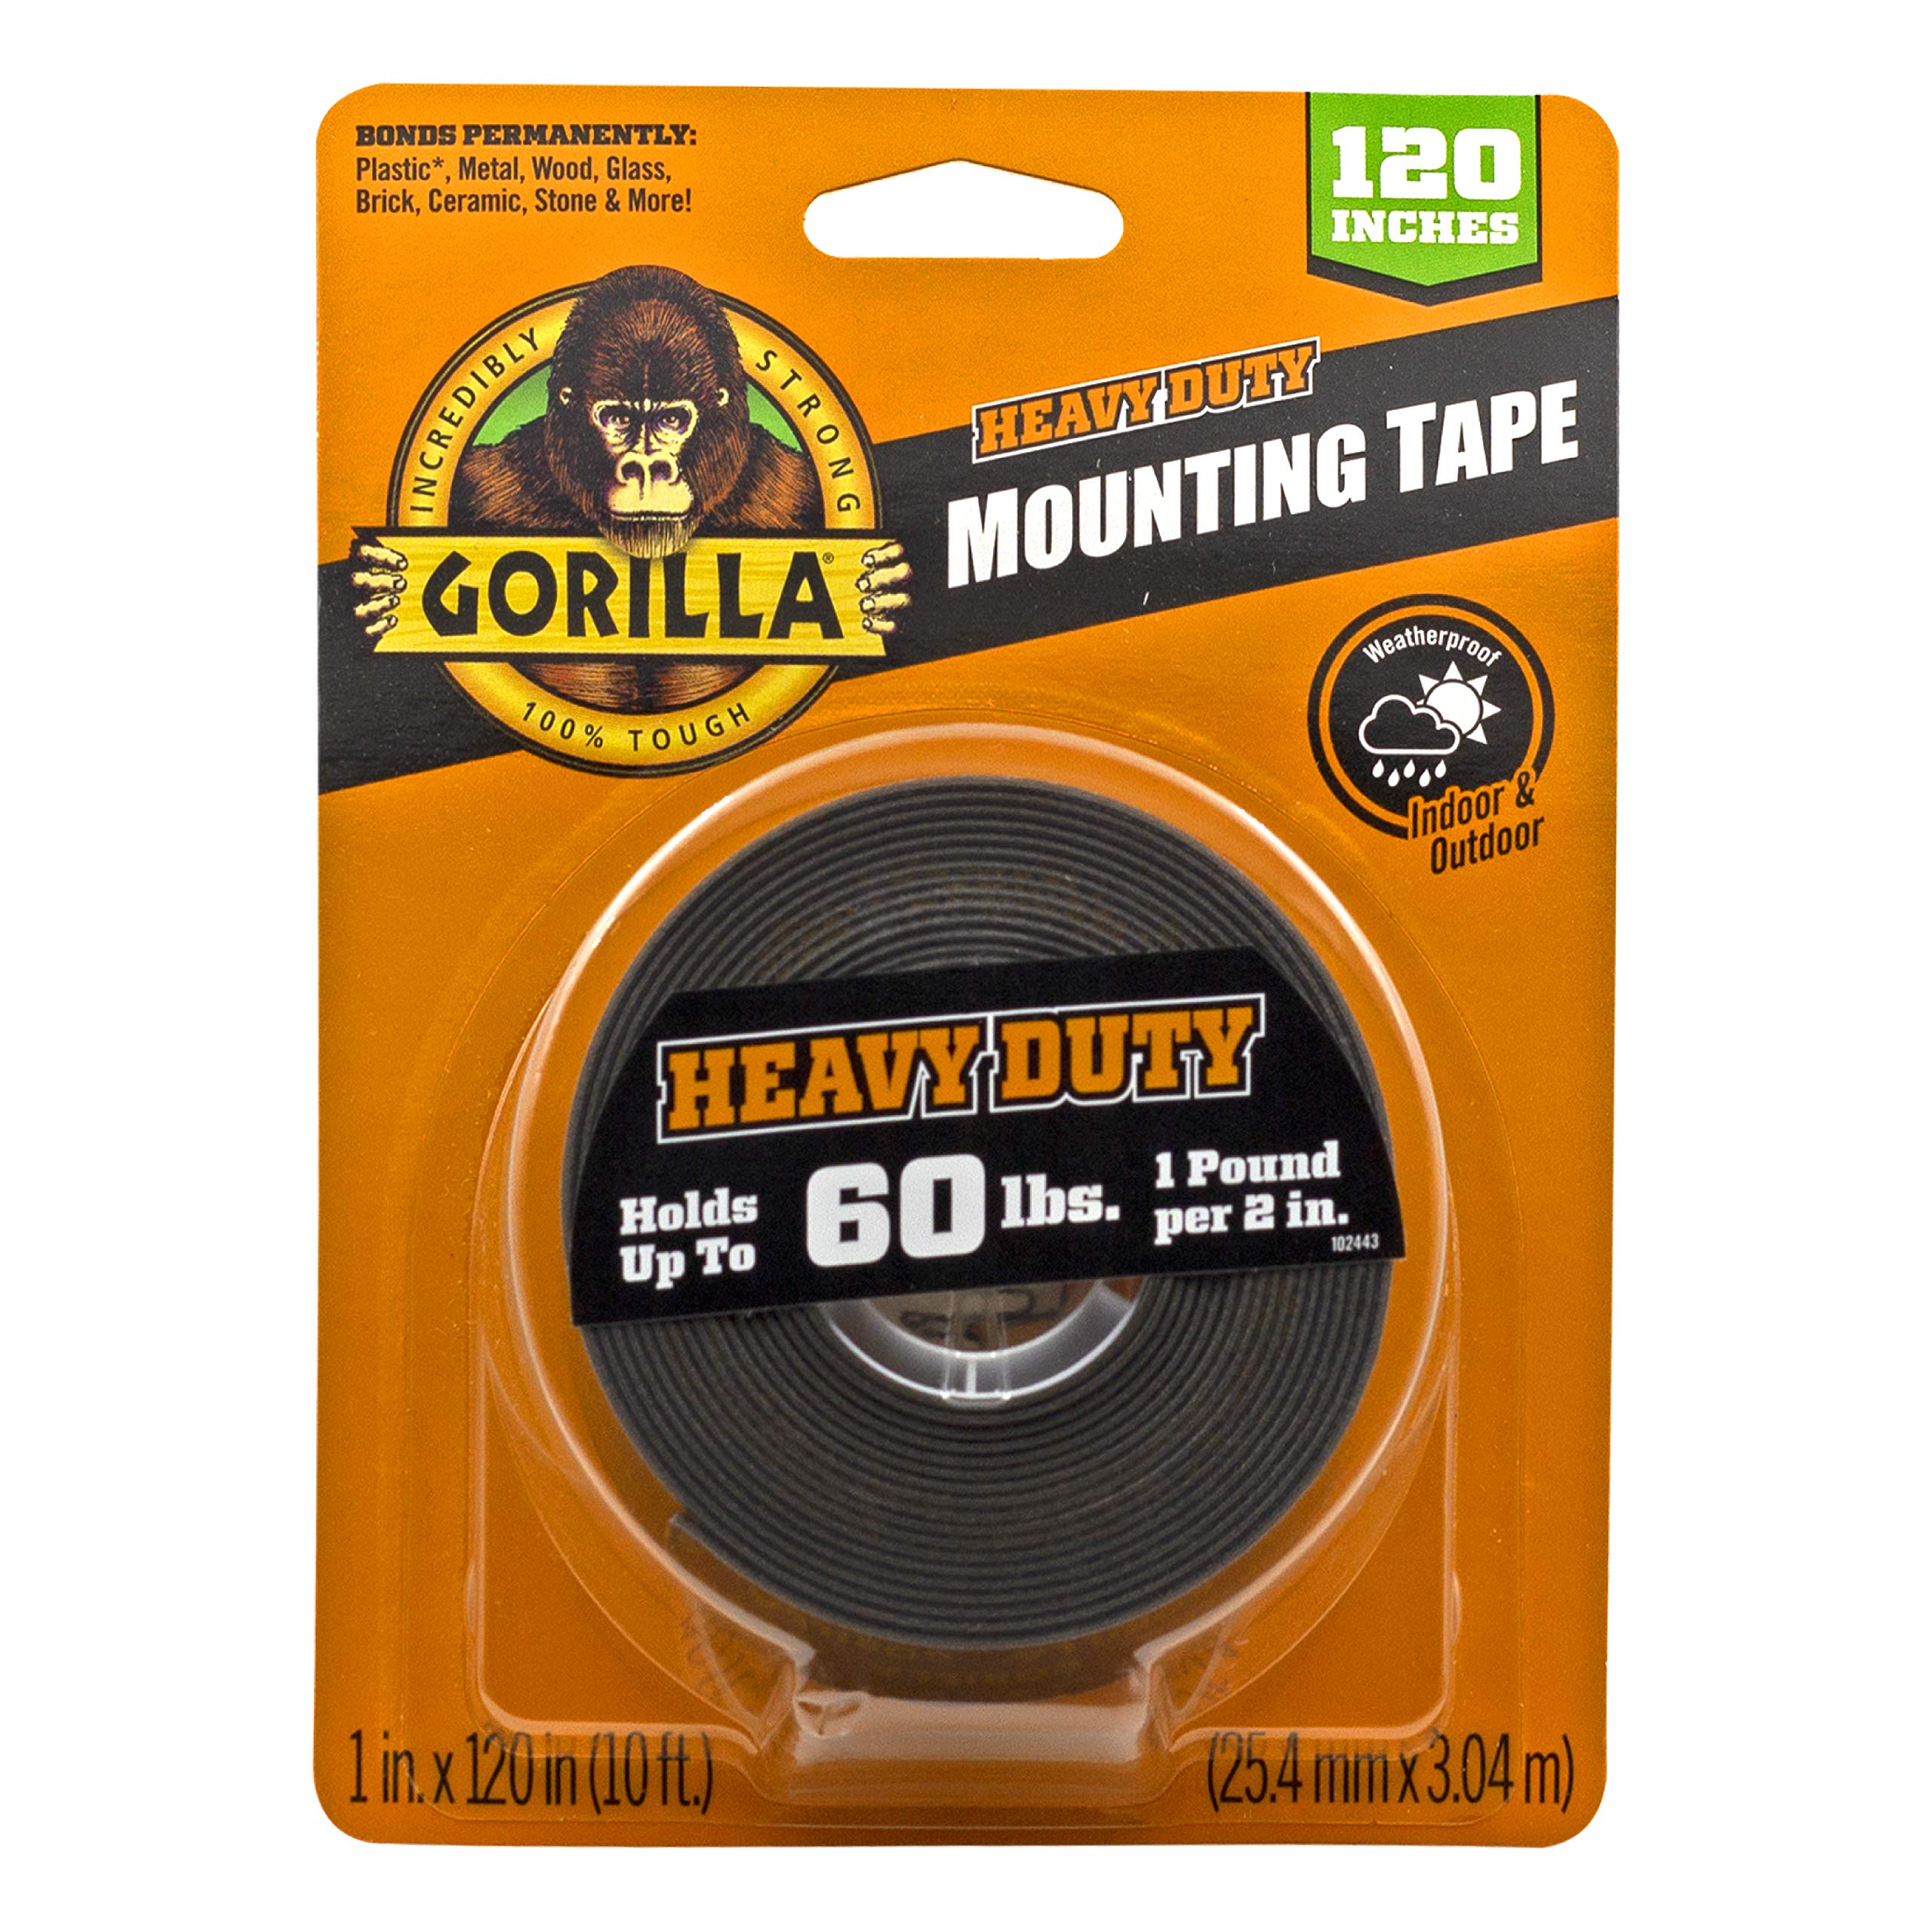 Gorilla Tough Clear Mounting Squares 1 Length x 1 Width 1 Pack